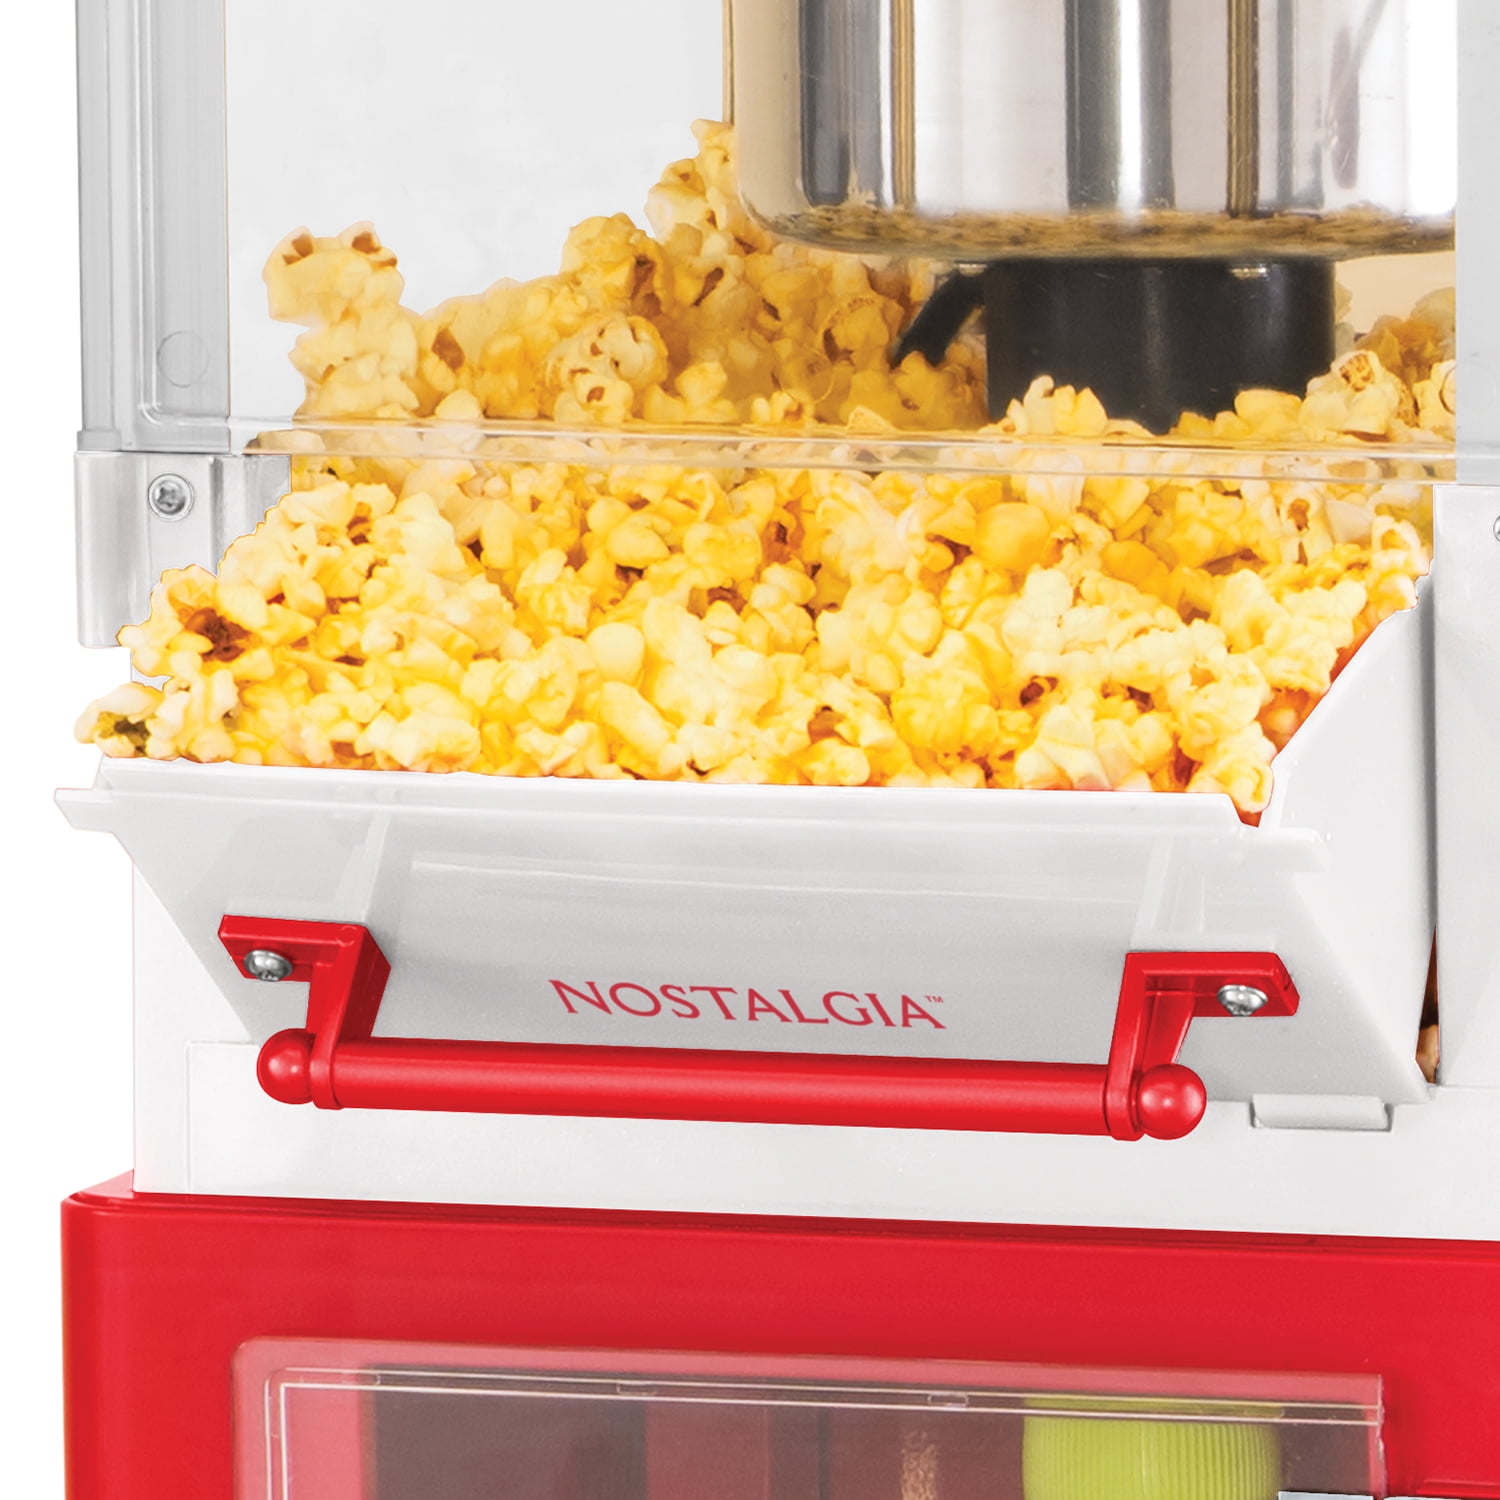 Nostalgia Popcorn Maker Machine - Professional Cart With 2.5 Oz Kettle  Makes Up to 10 Cups - Vintage Popcorn Machine Movie Theater Style - Red